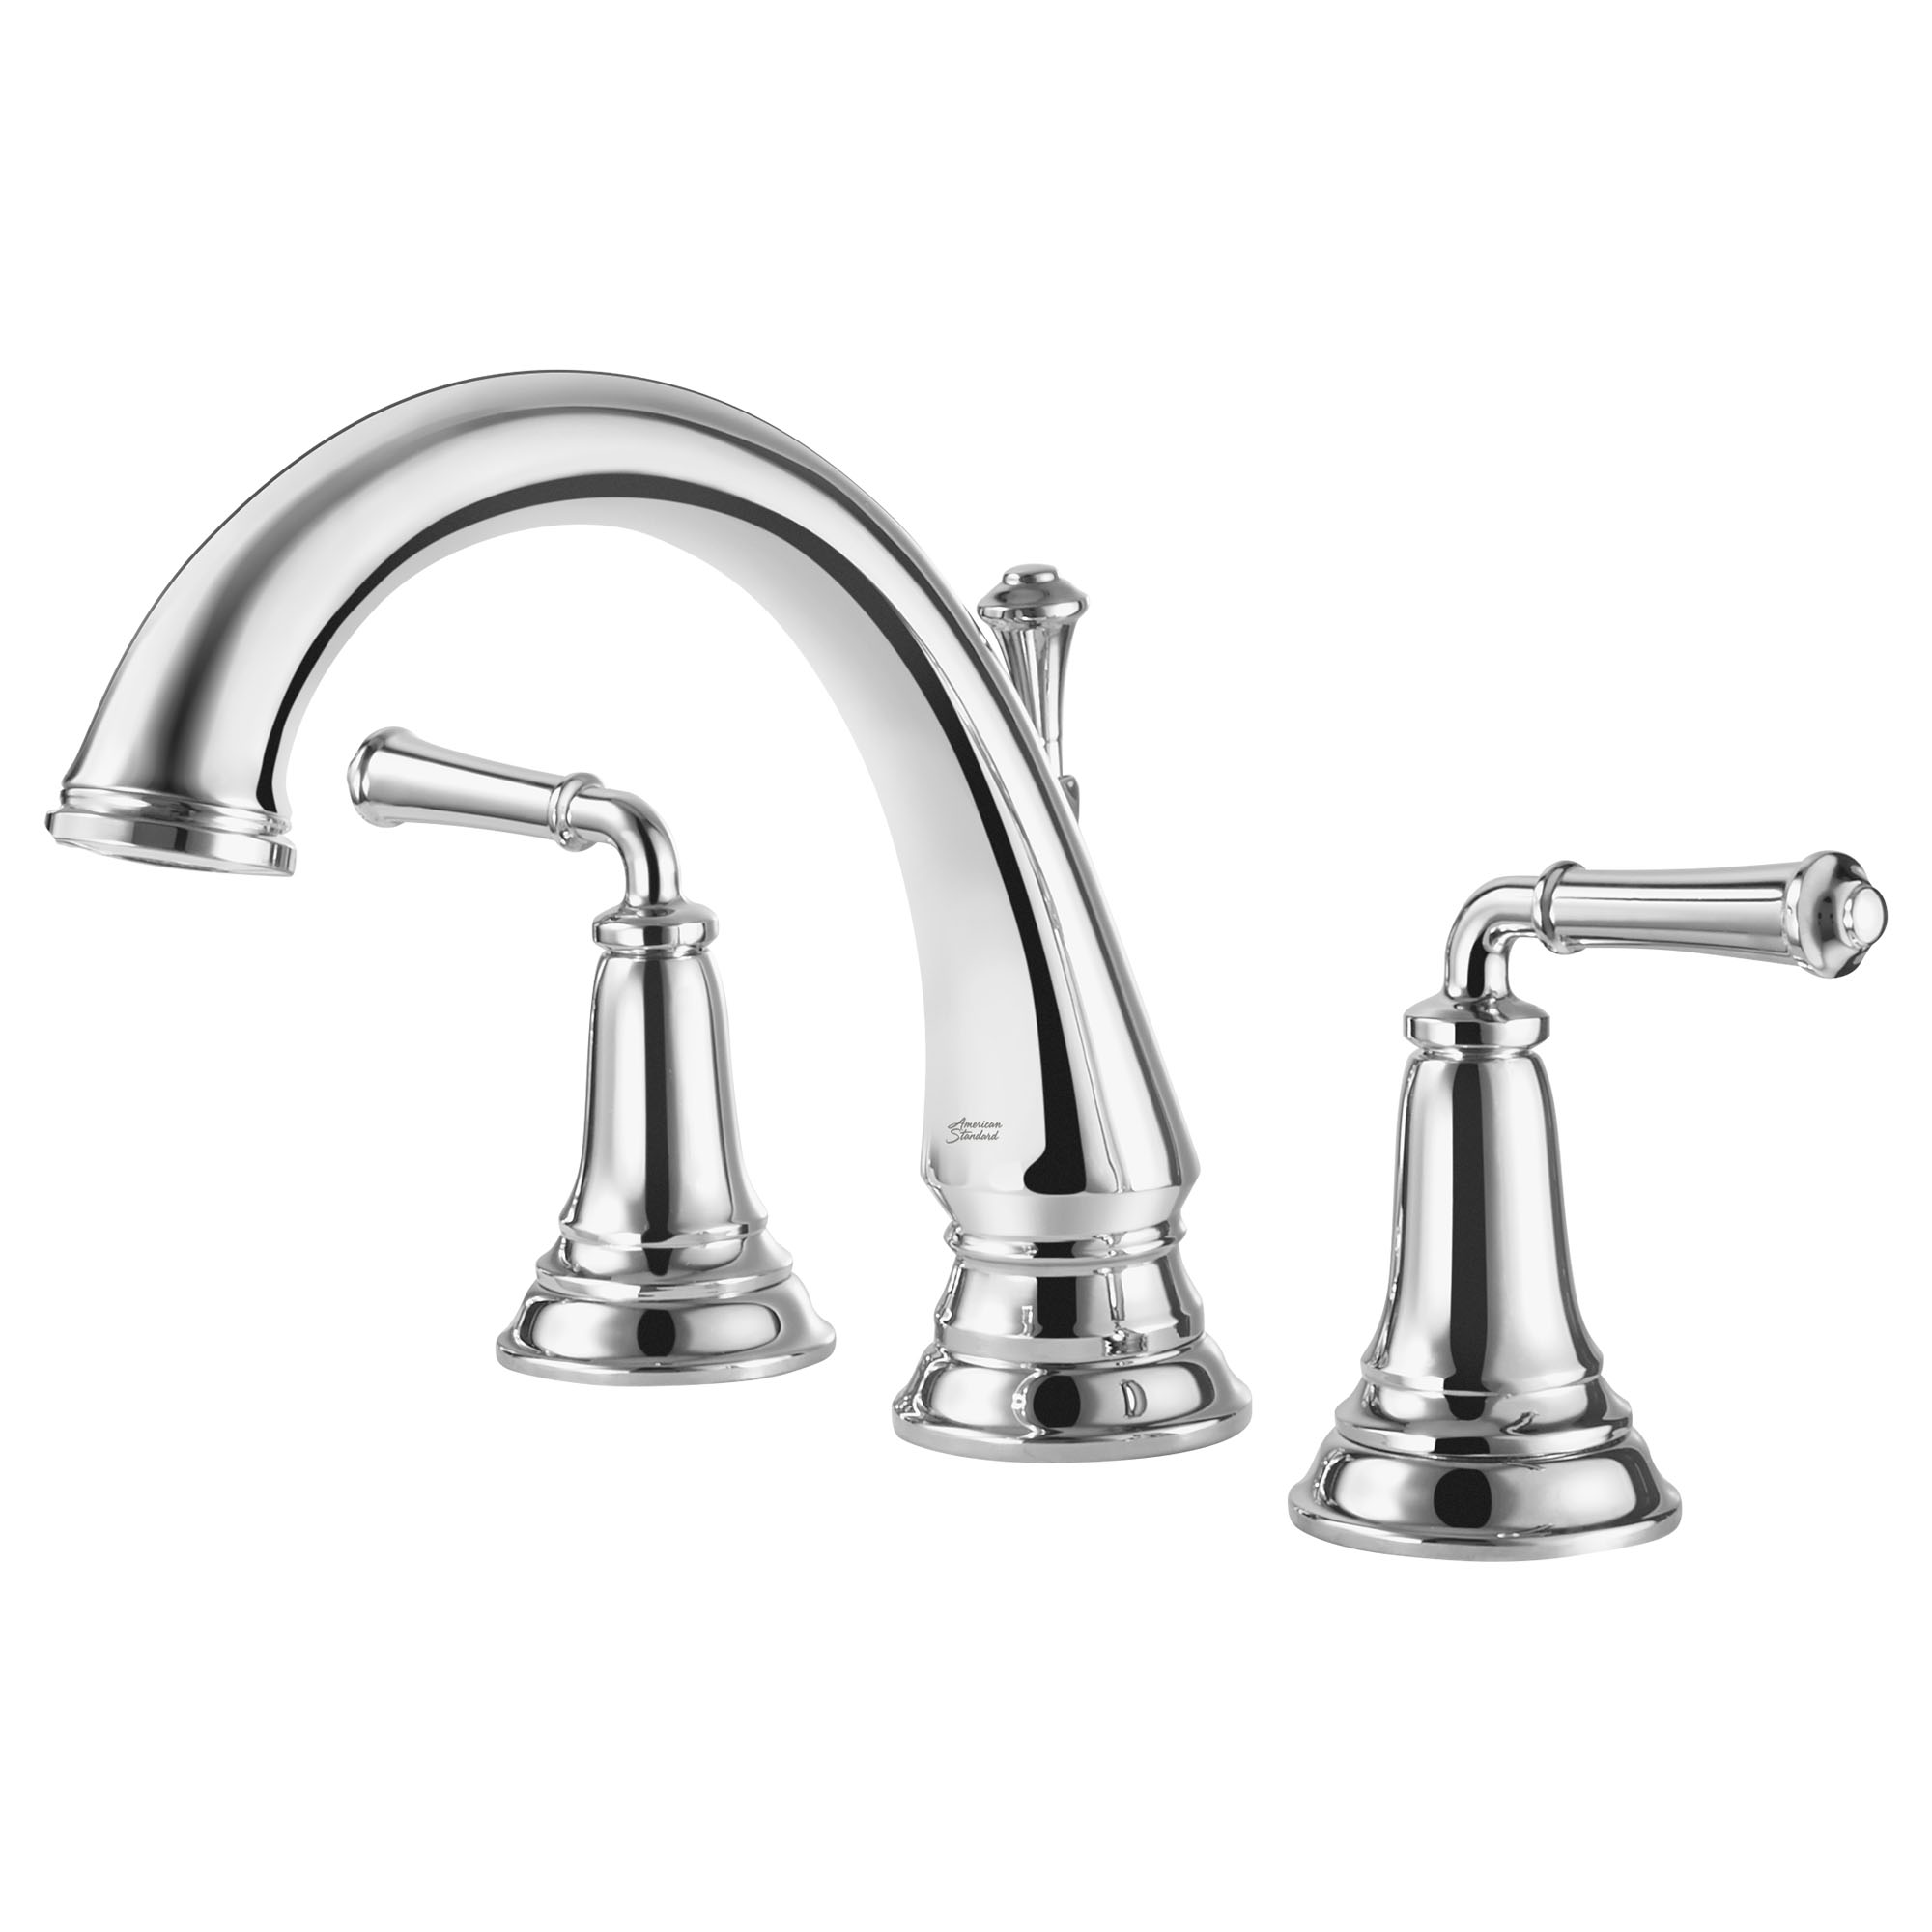 Delancey™ Bathtub Faucet With Lever Handles for Flash™ Rough-In Valve